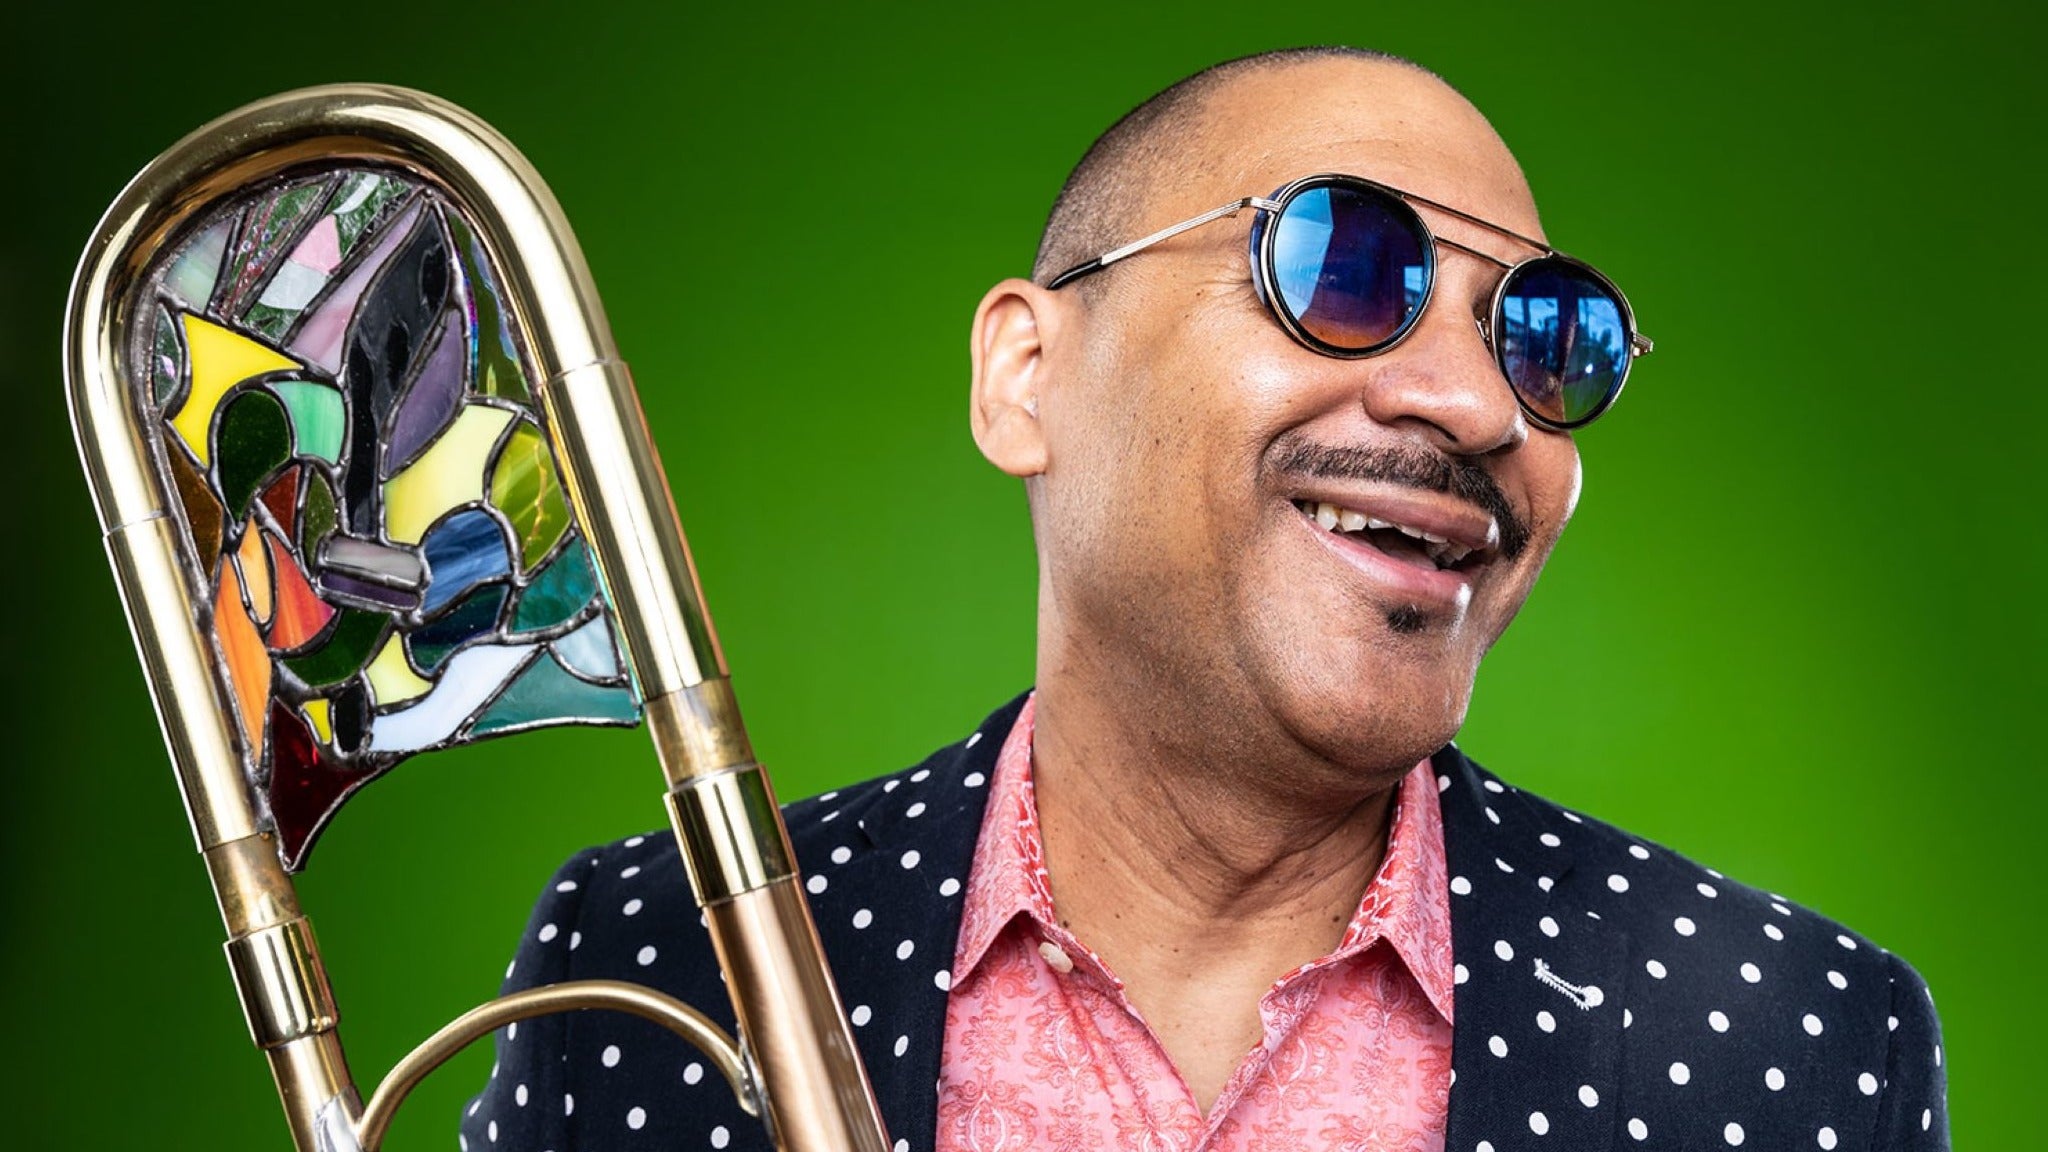 Delfeayo Marsalis & The Uptown Jazz Orchestra in Portsmouth promo photo for Inner Circle presale offer code